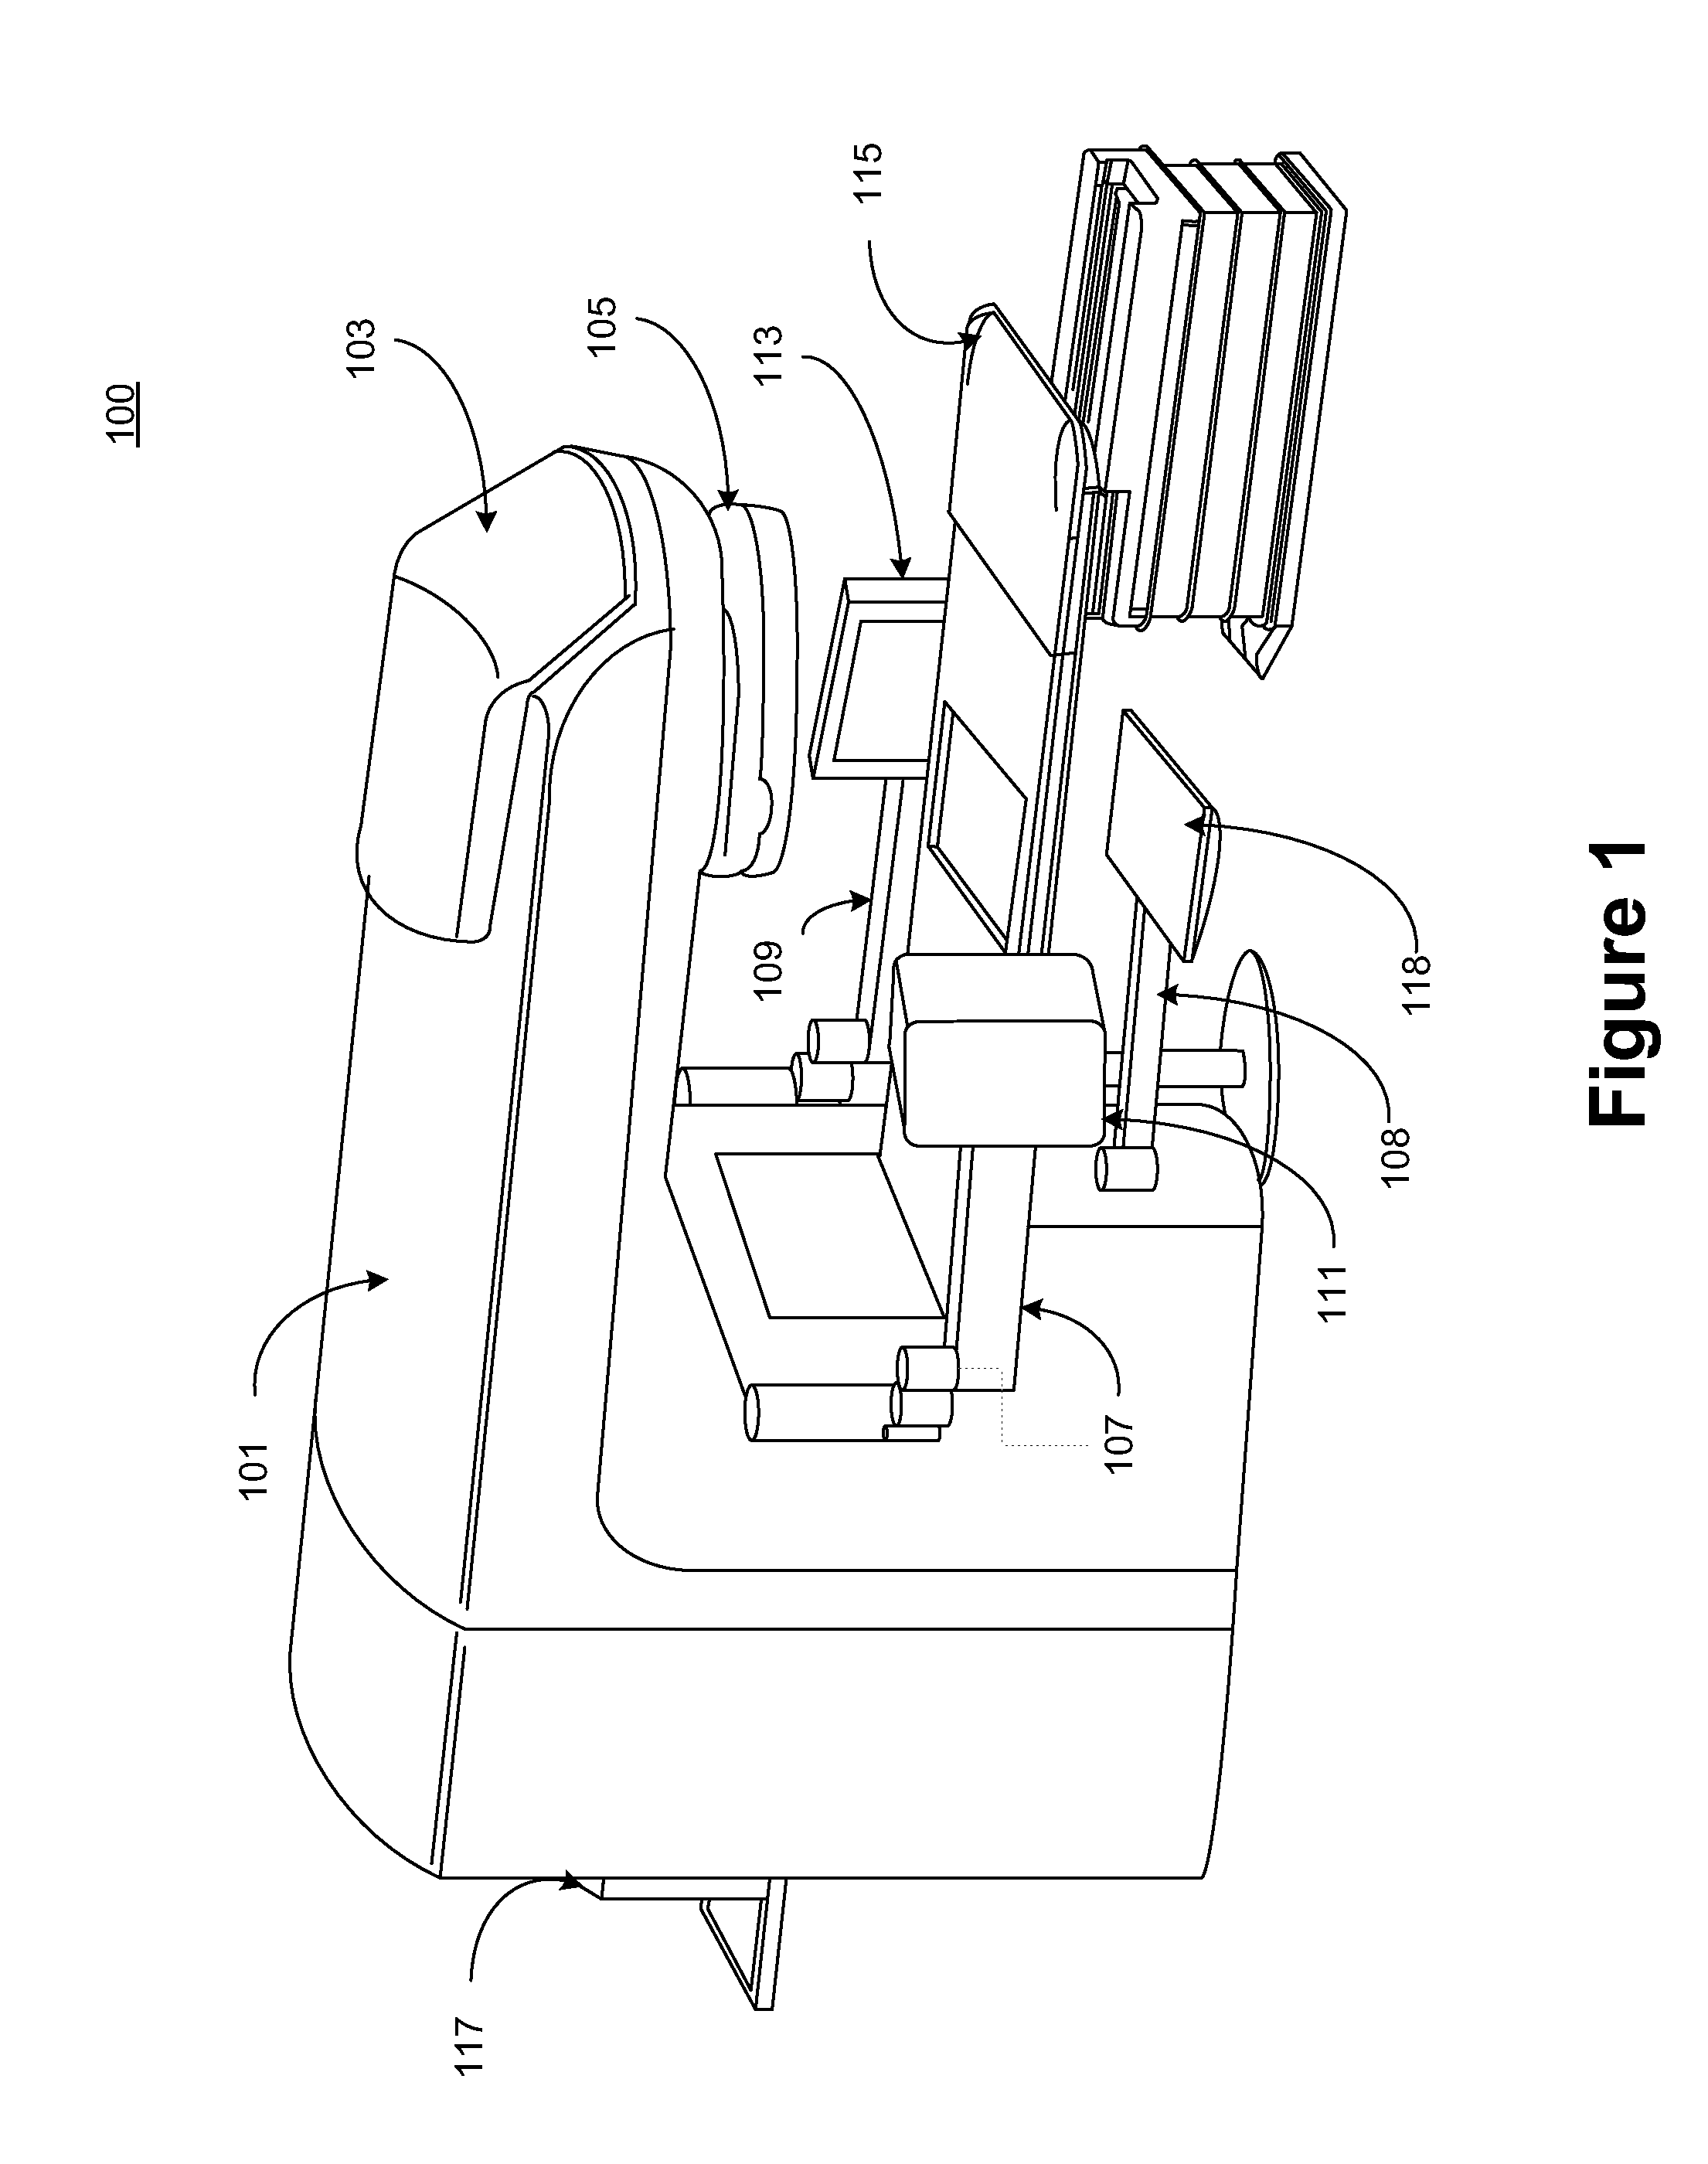 System and method for measuring x-ray beam profile using an area detector